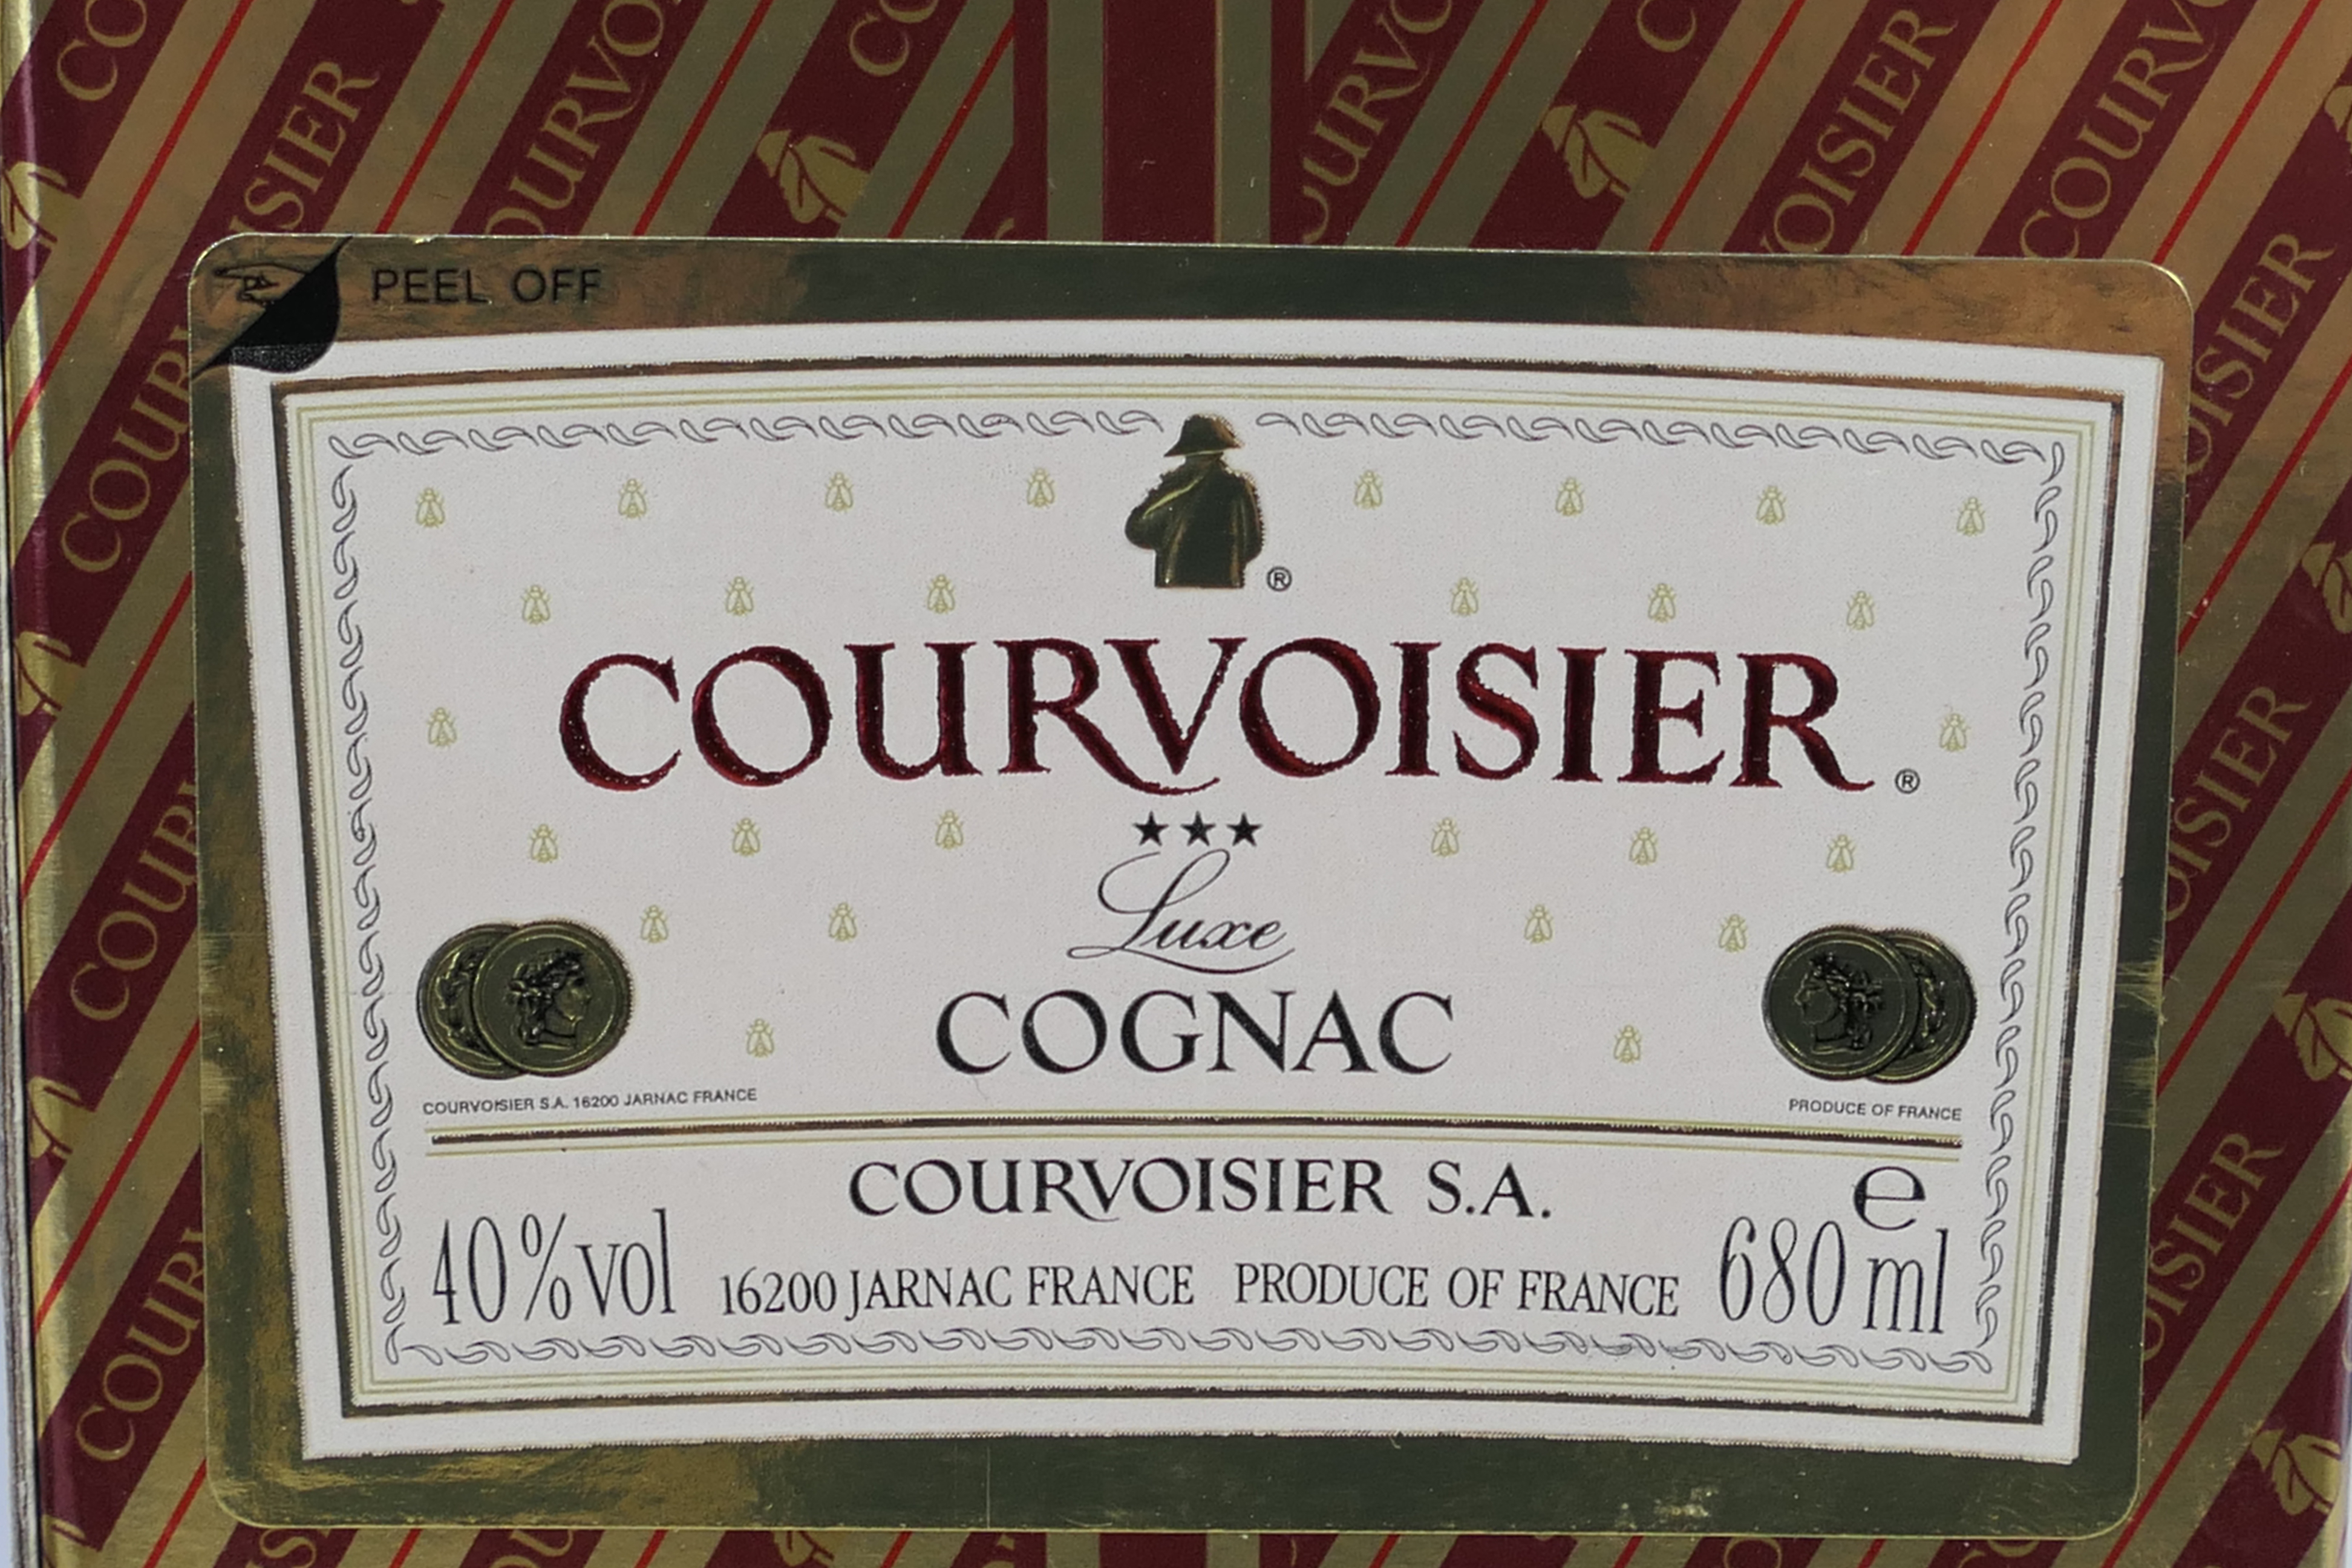 Cognac - Courvoisier *** Luxe, 680ml, 40% vol, level upper shoulder, contained in carton. - Image 5 of 5